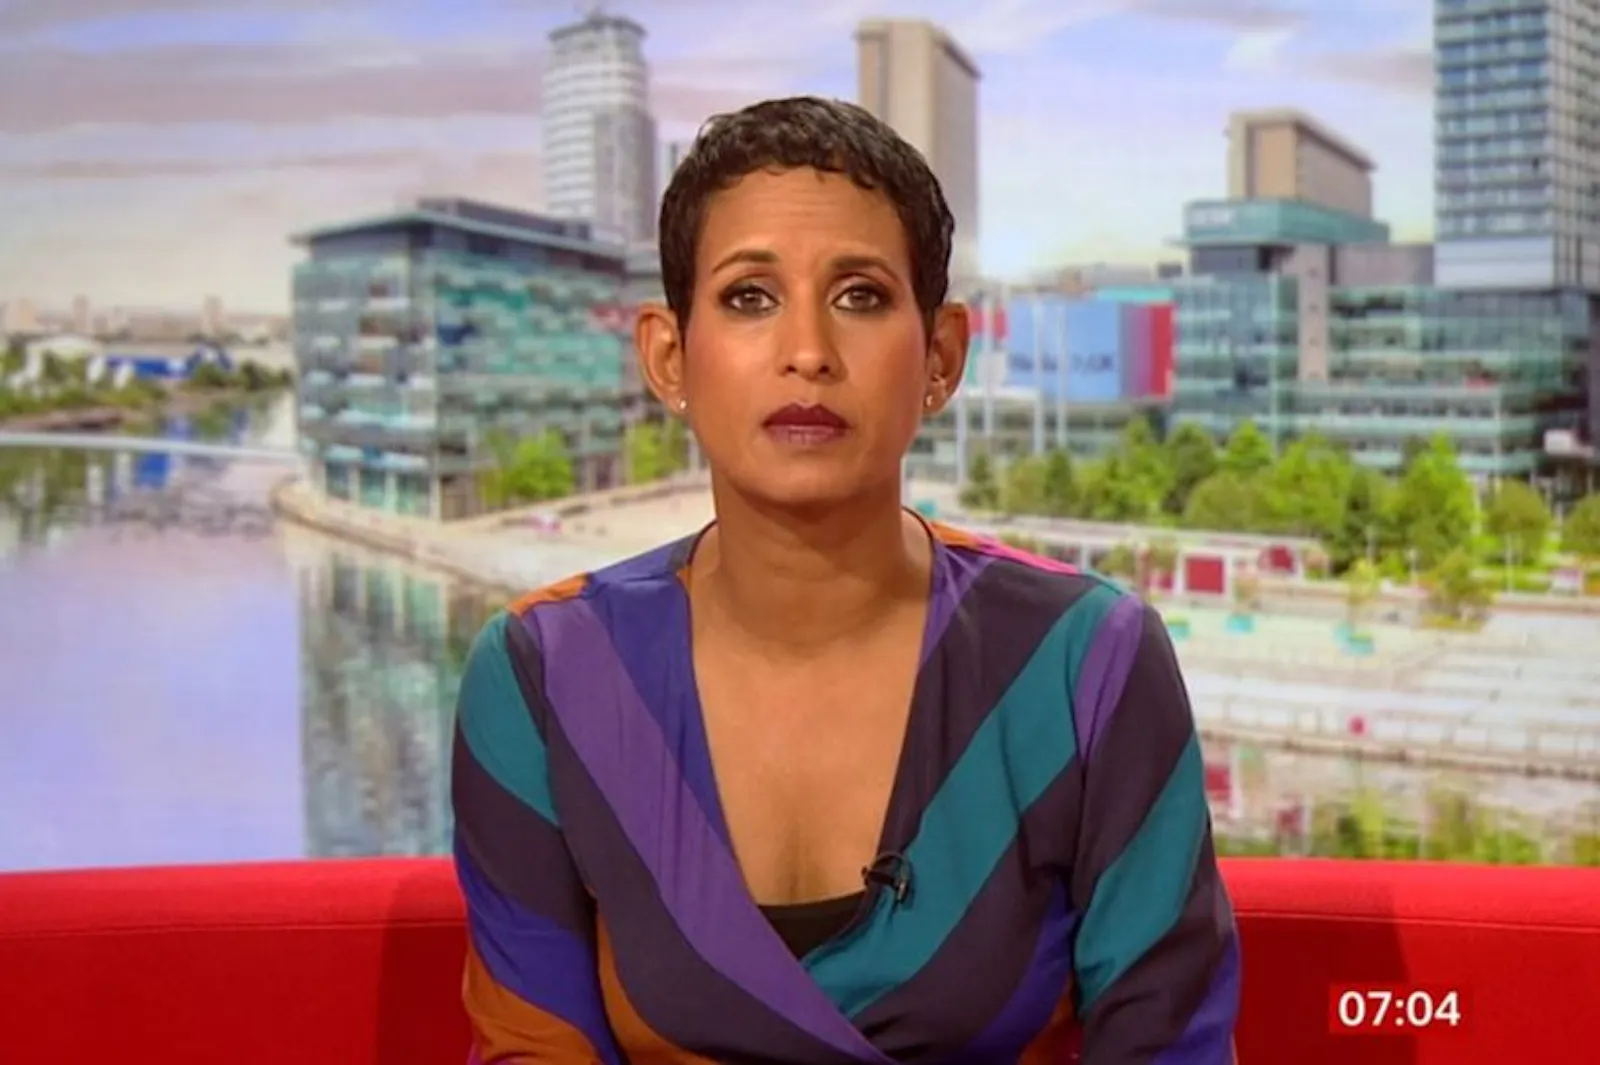 naga munchetty a brown woman in her 40s